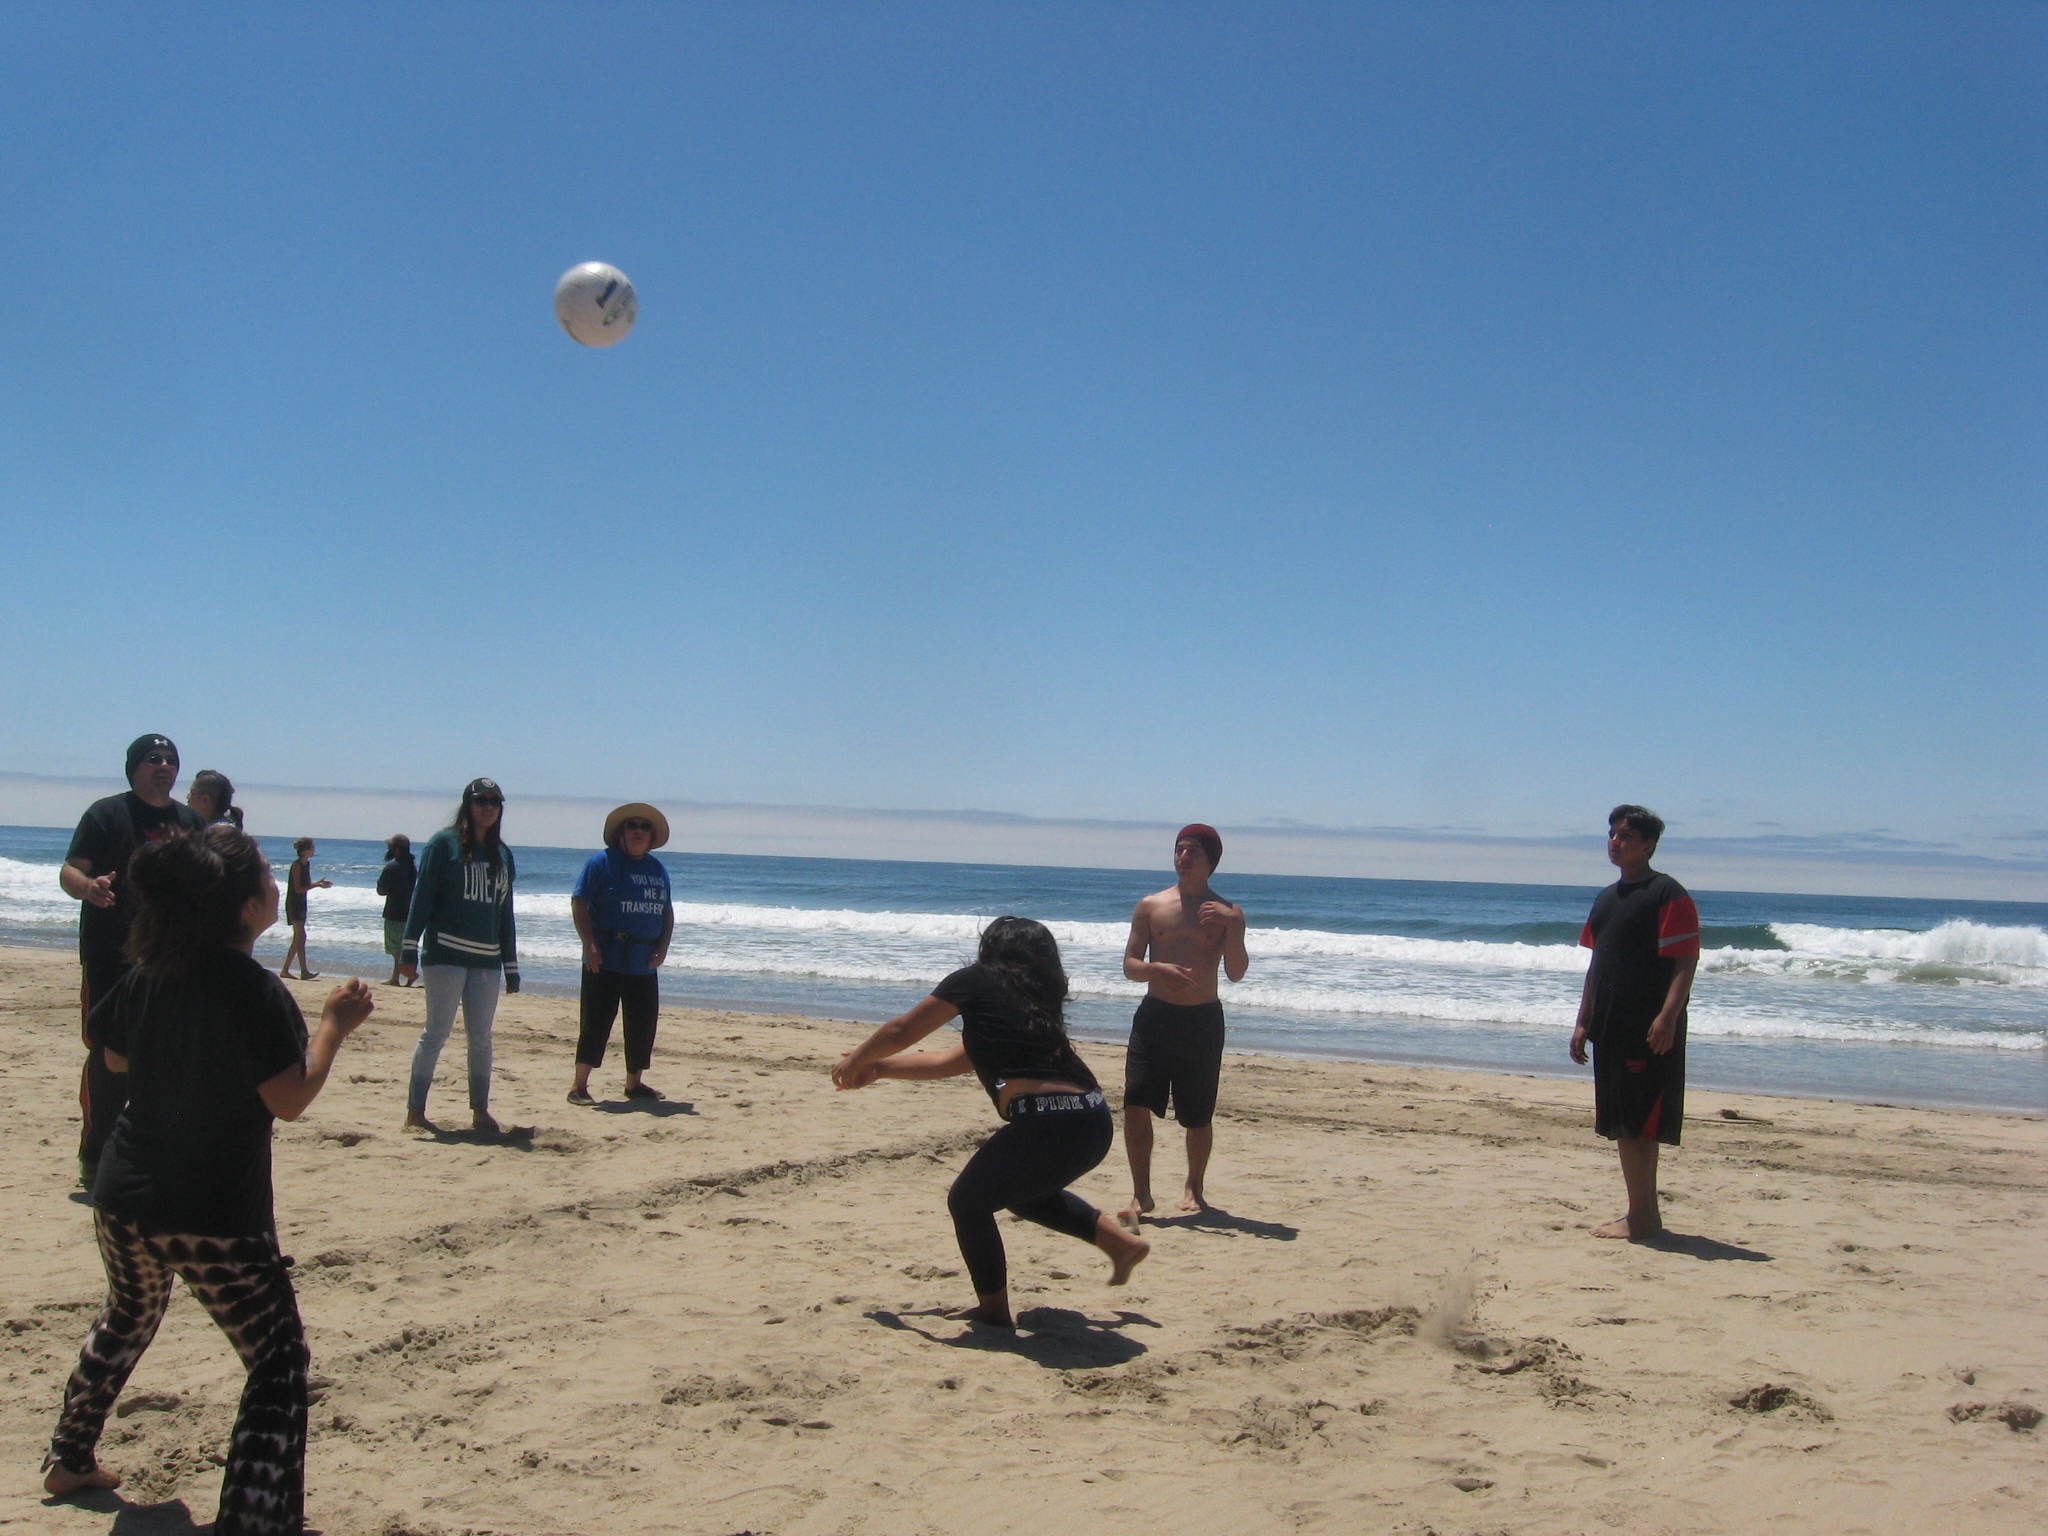 Campers get competitive in improvised beach volleyball. Photo courtesy Jay Scherf.